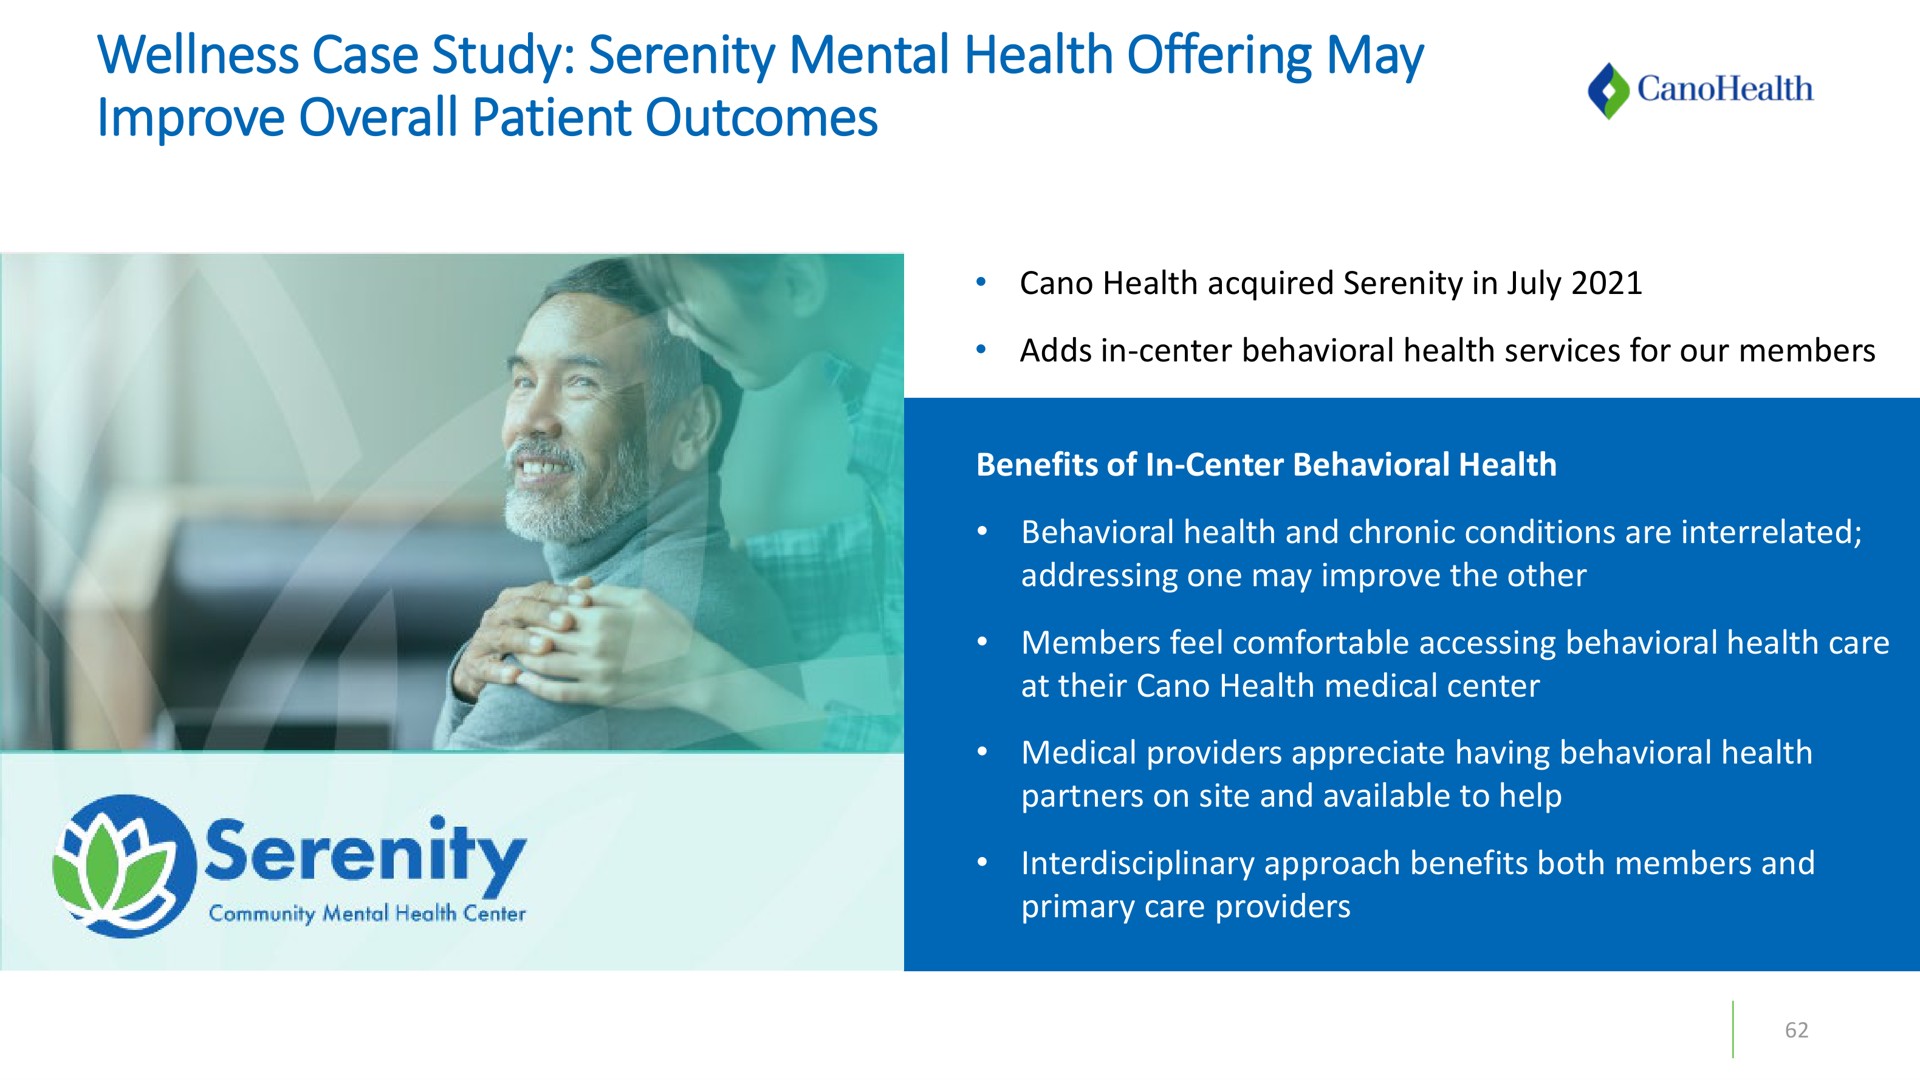 wellness case study serenity mental health offering may improve overall patient outcomes | Cano Health